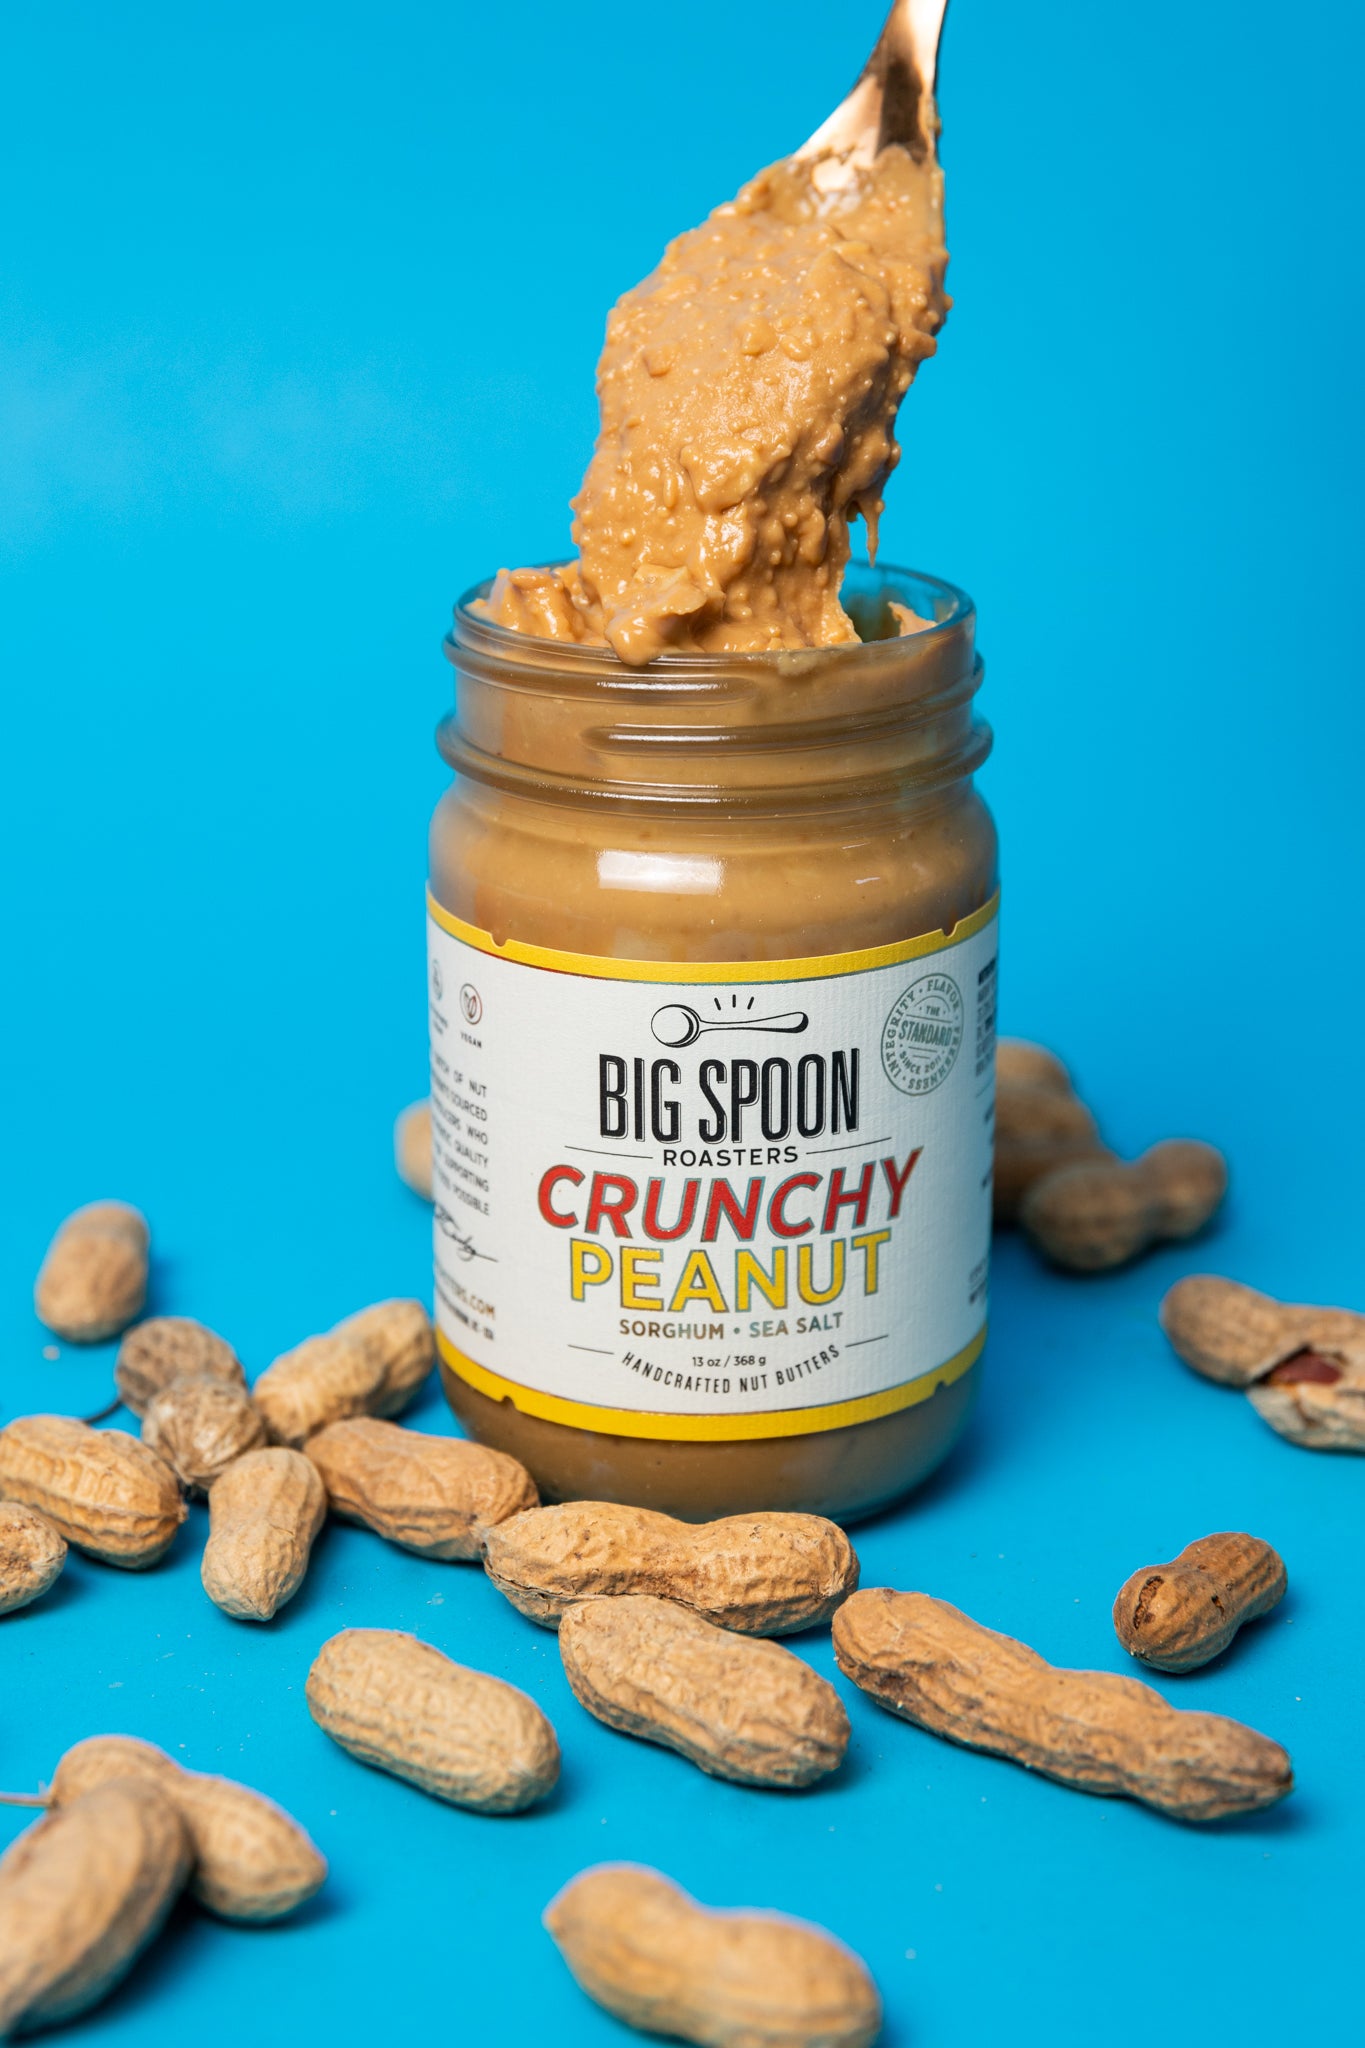 🤯 The debut of the world's CRUNCHIEST peanut butter